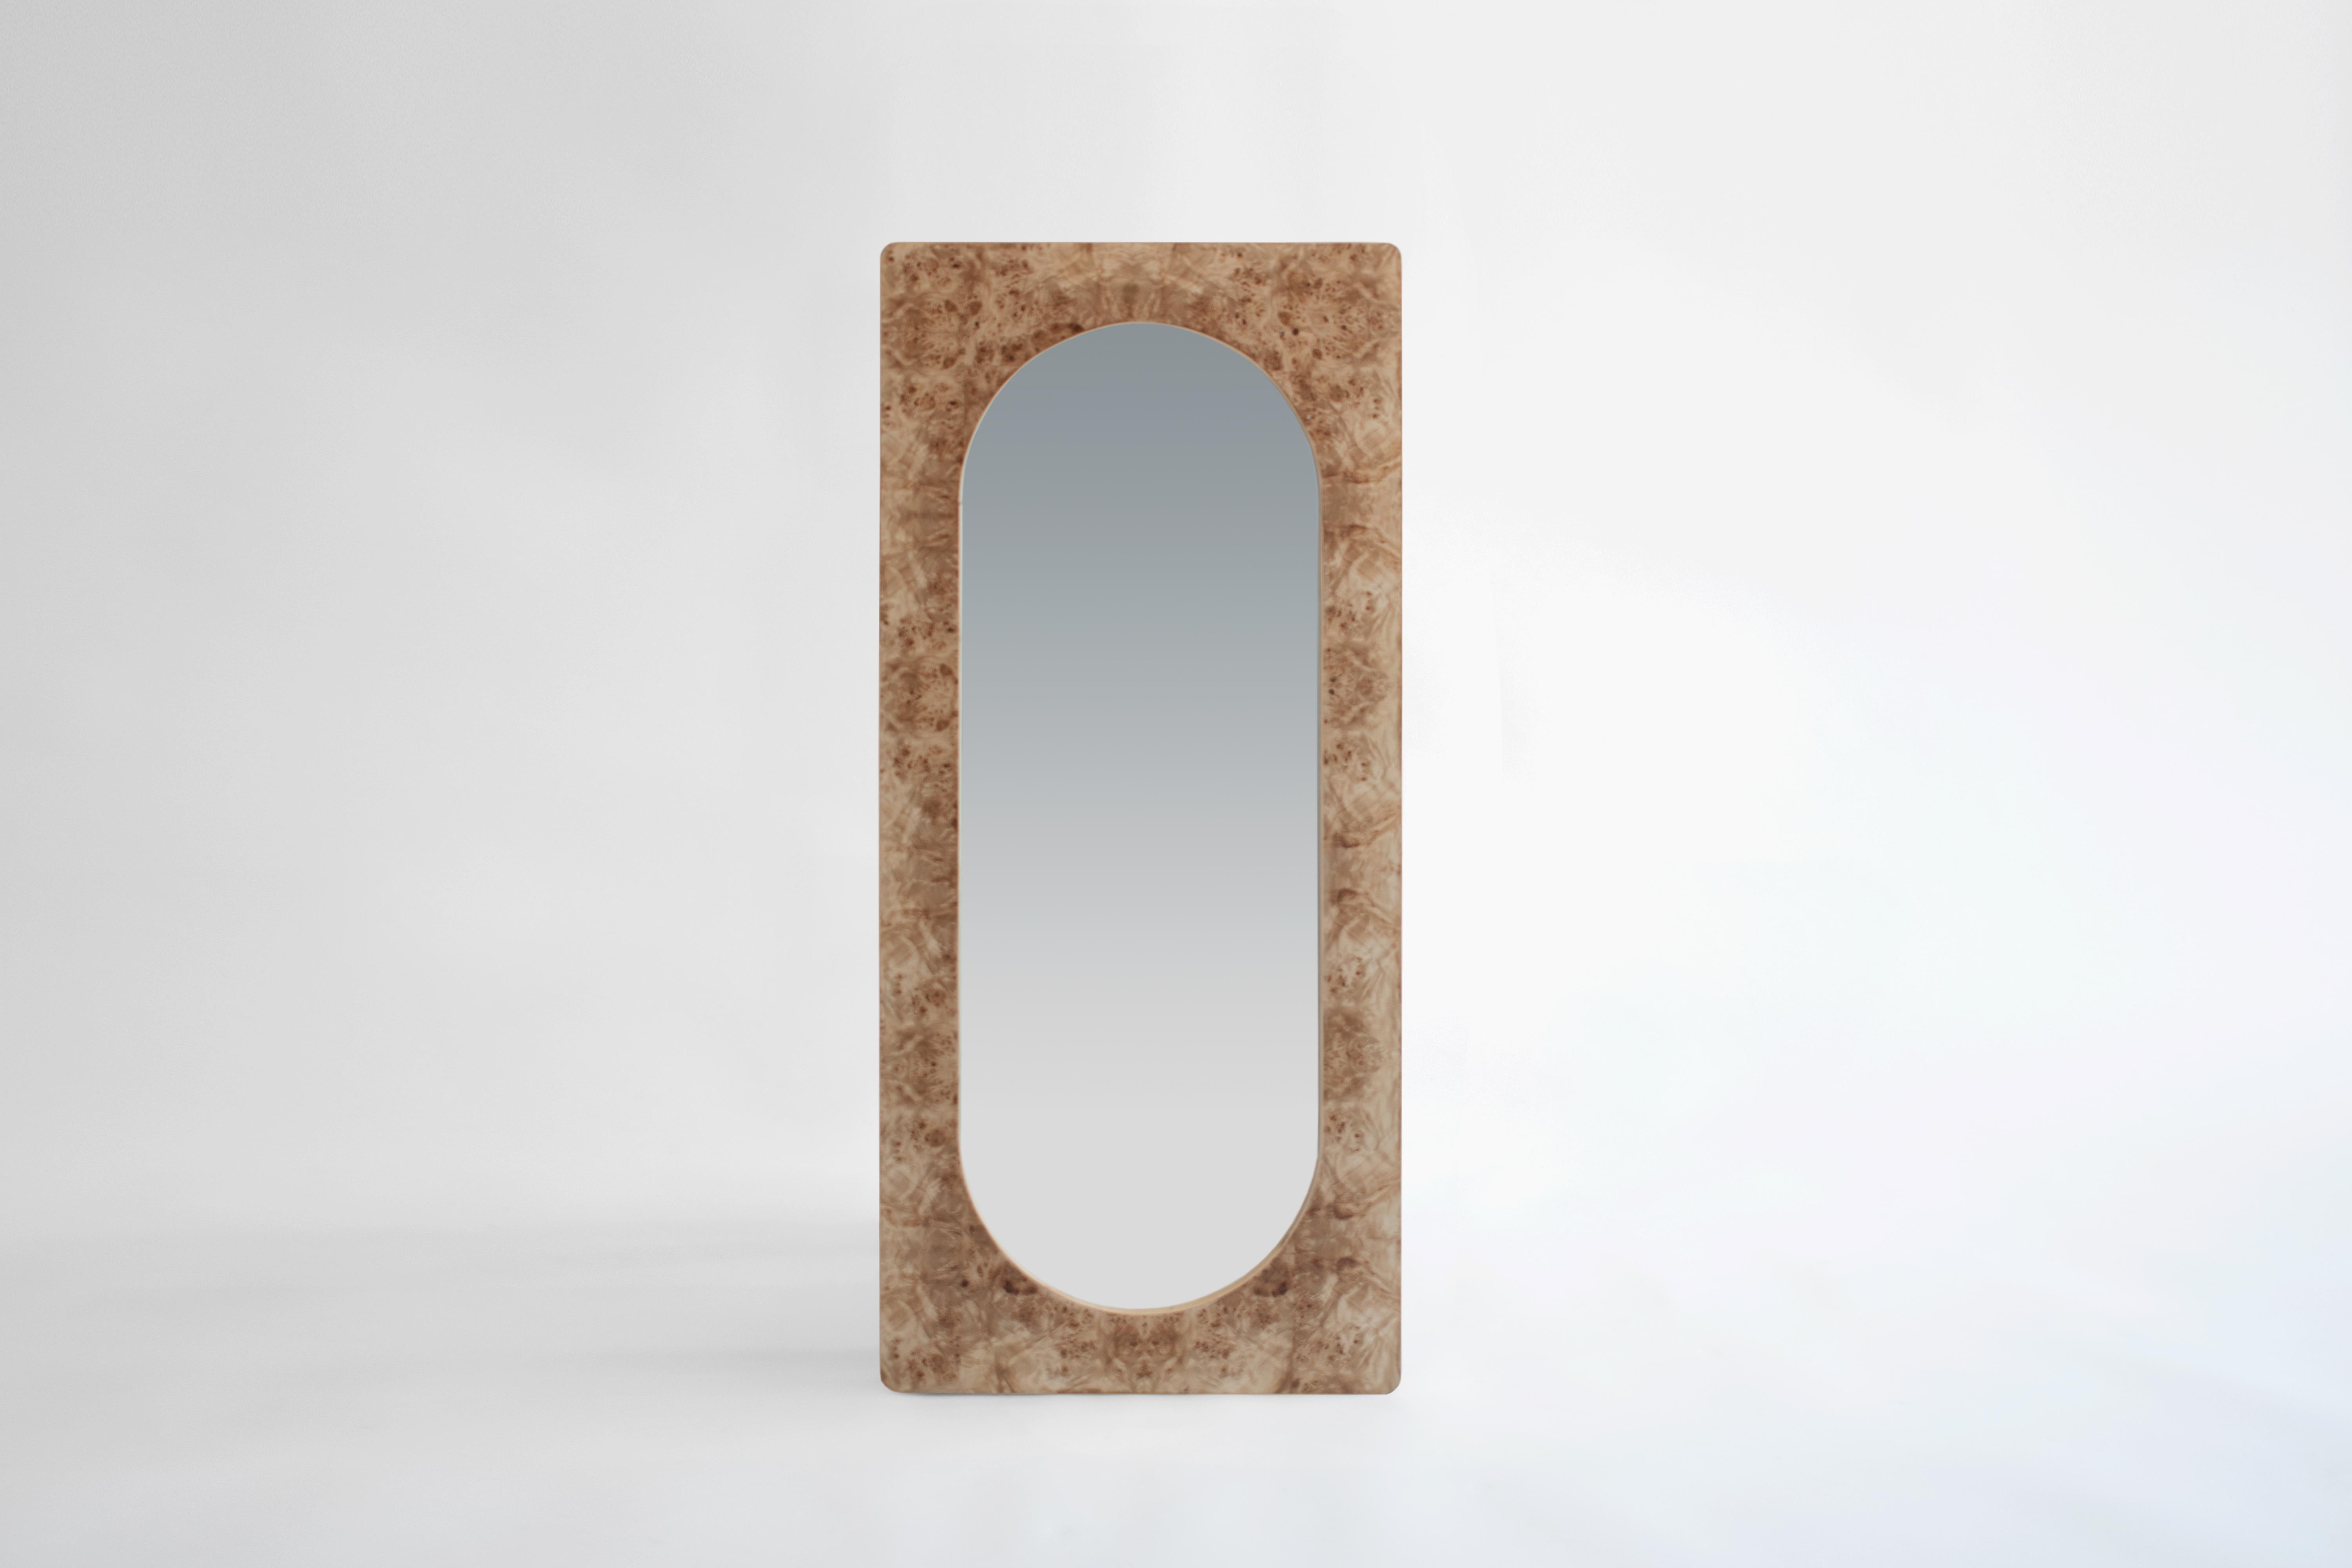 Wall mirror (for leaning or hanging) made of wood and mappa burl veneer.

This mirror piece draws inspiration from its twin mirror pieces in the collection. Liberated from its plinth, this leaning version is applicable both vertically and